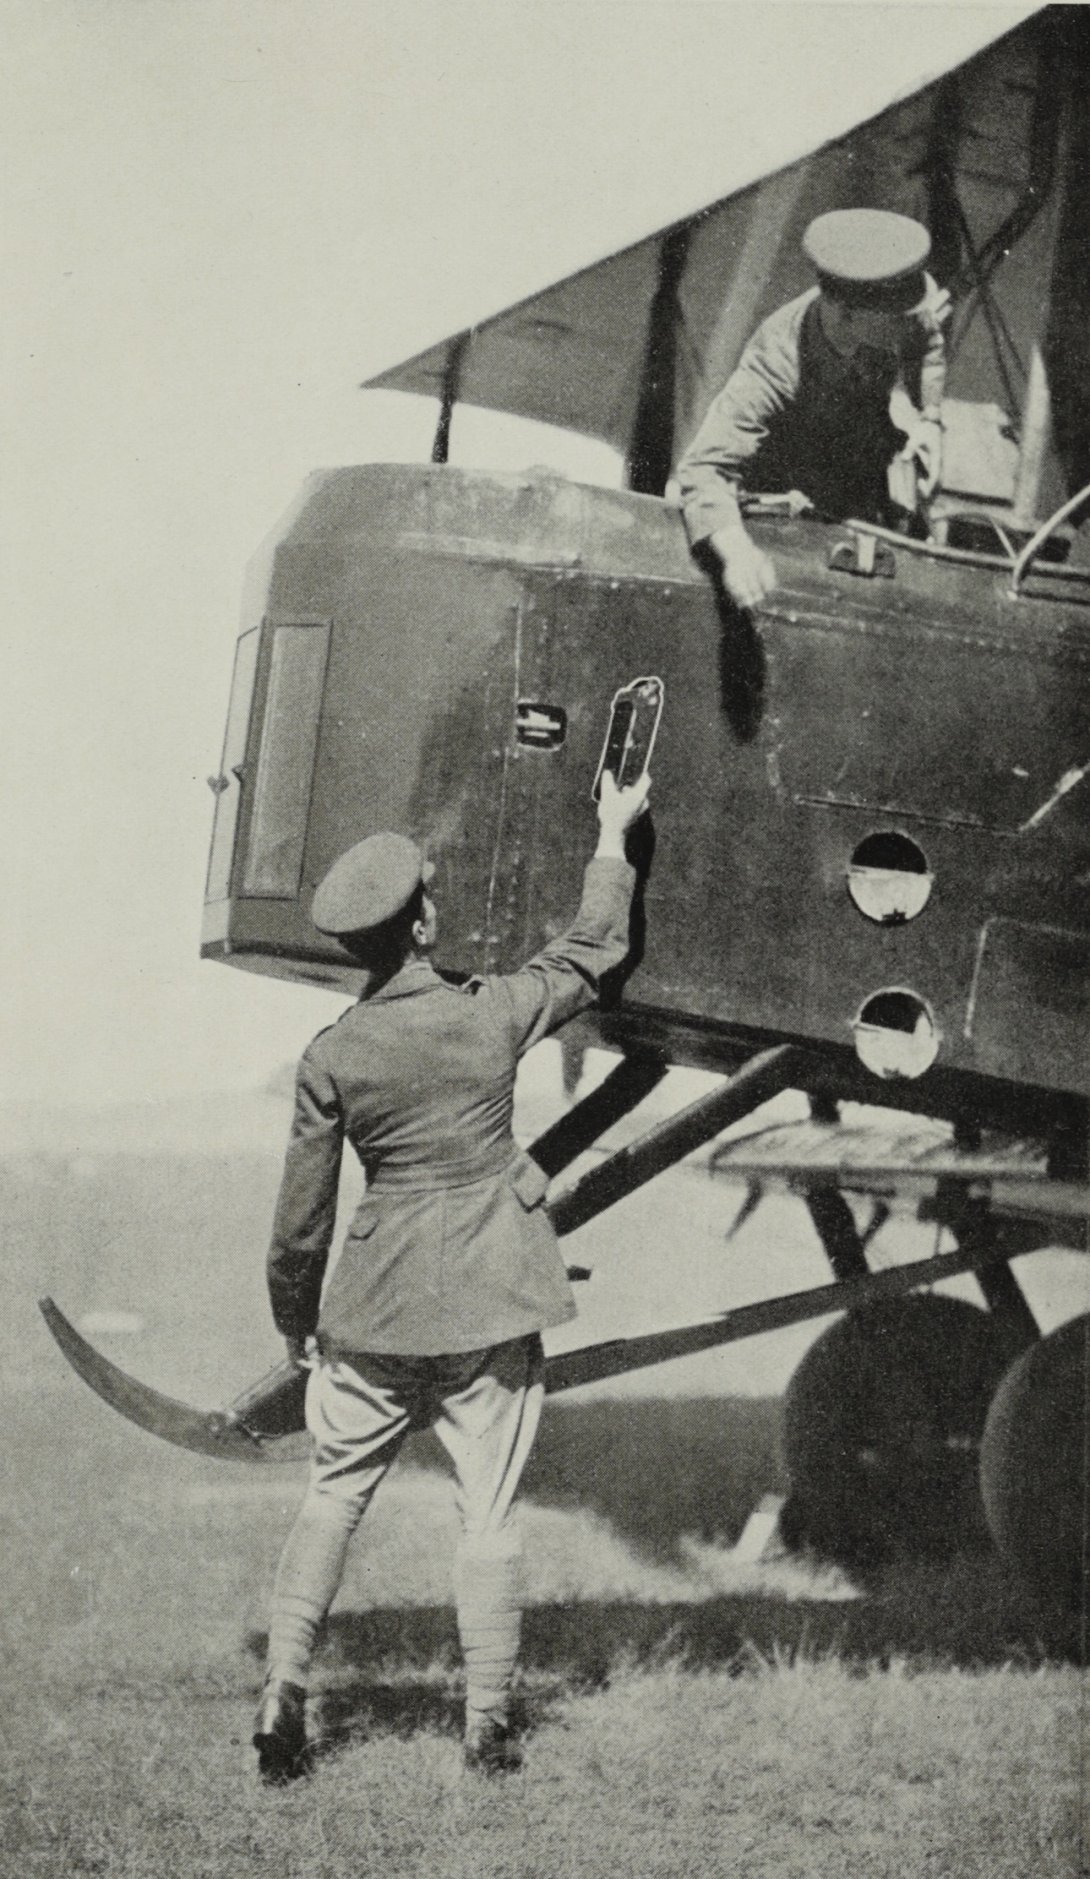 Man in military uniform standing next to front of plane, reaching up with camera in his hand while man in cockpit reaches down to grab it